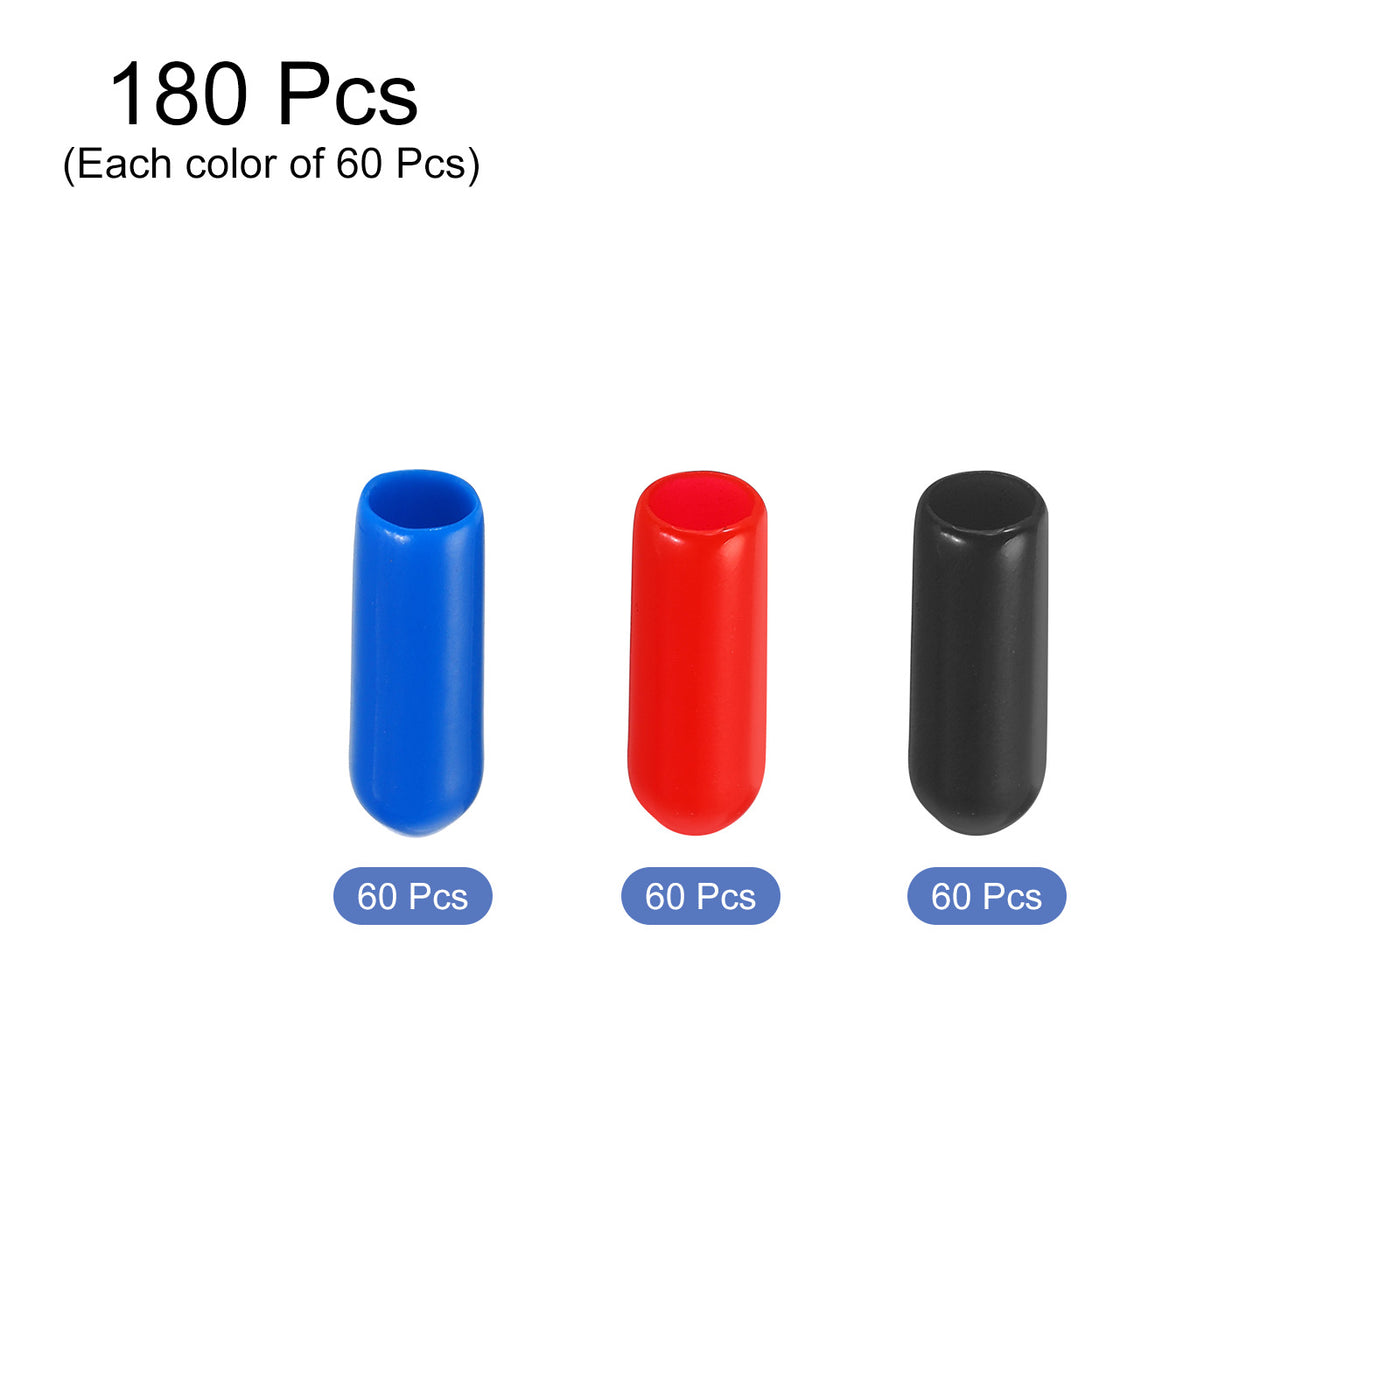 uxcell Uxcell 180pcs Rubber End Caps 5.5mm ID Vinyl PVC Round Tube Bolt Cap Cover Screw Thread Protectors, Black Red Blue